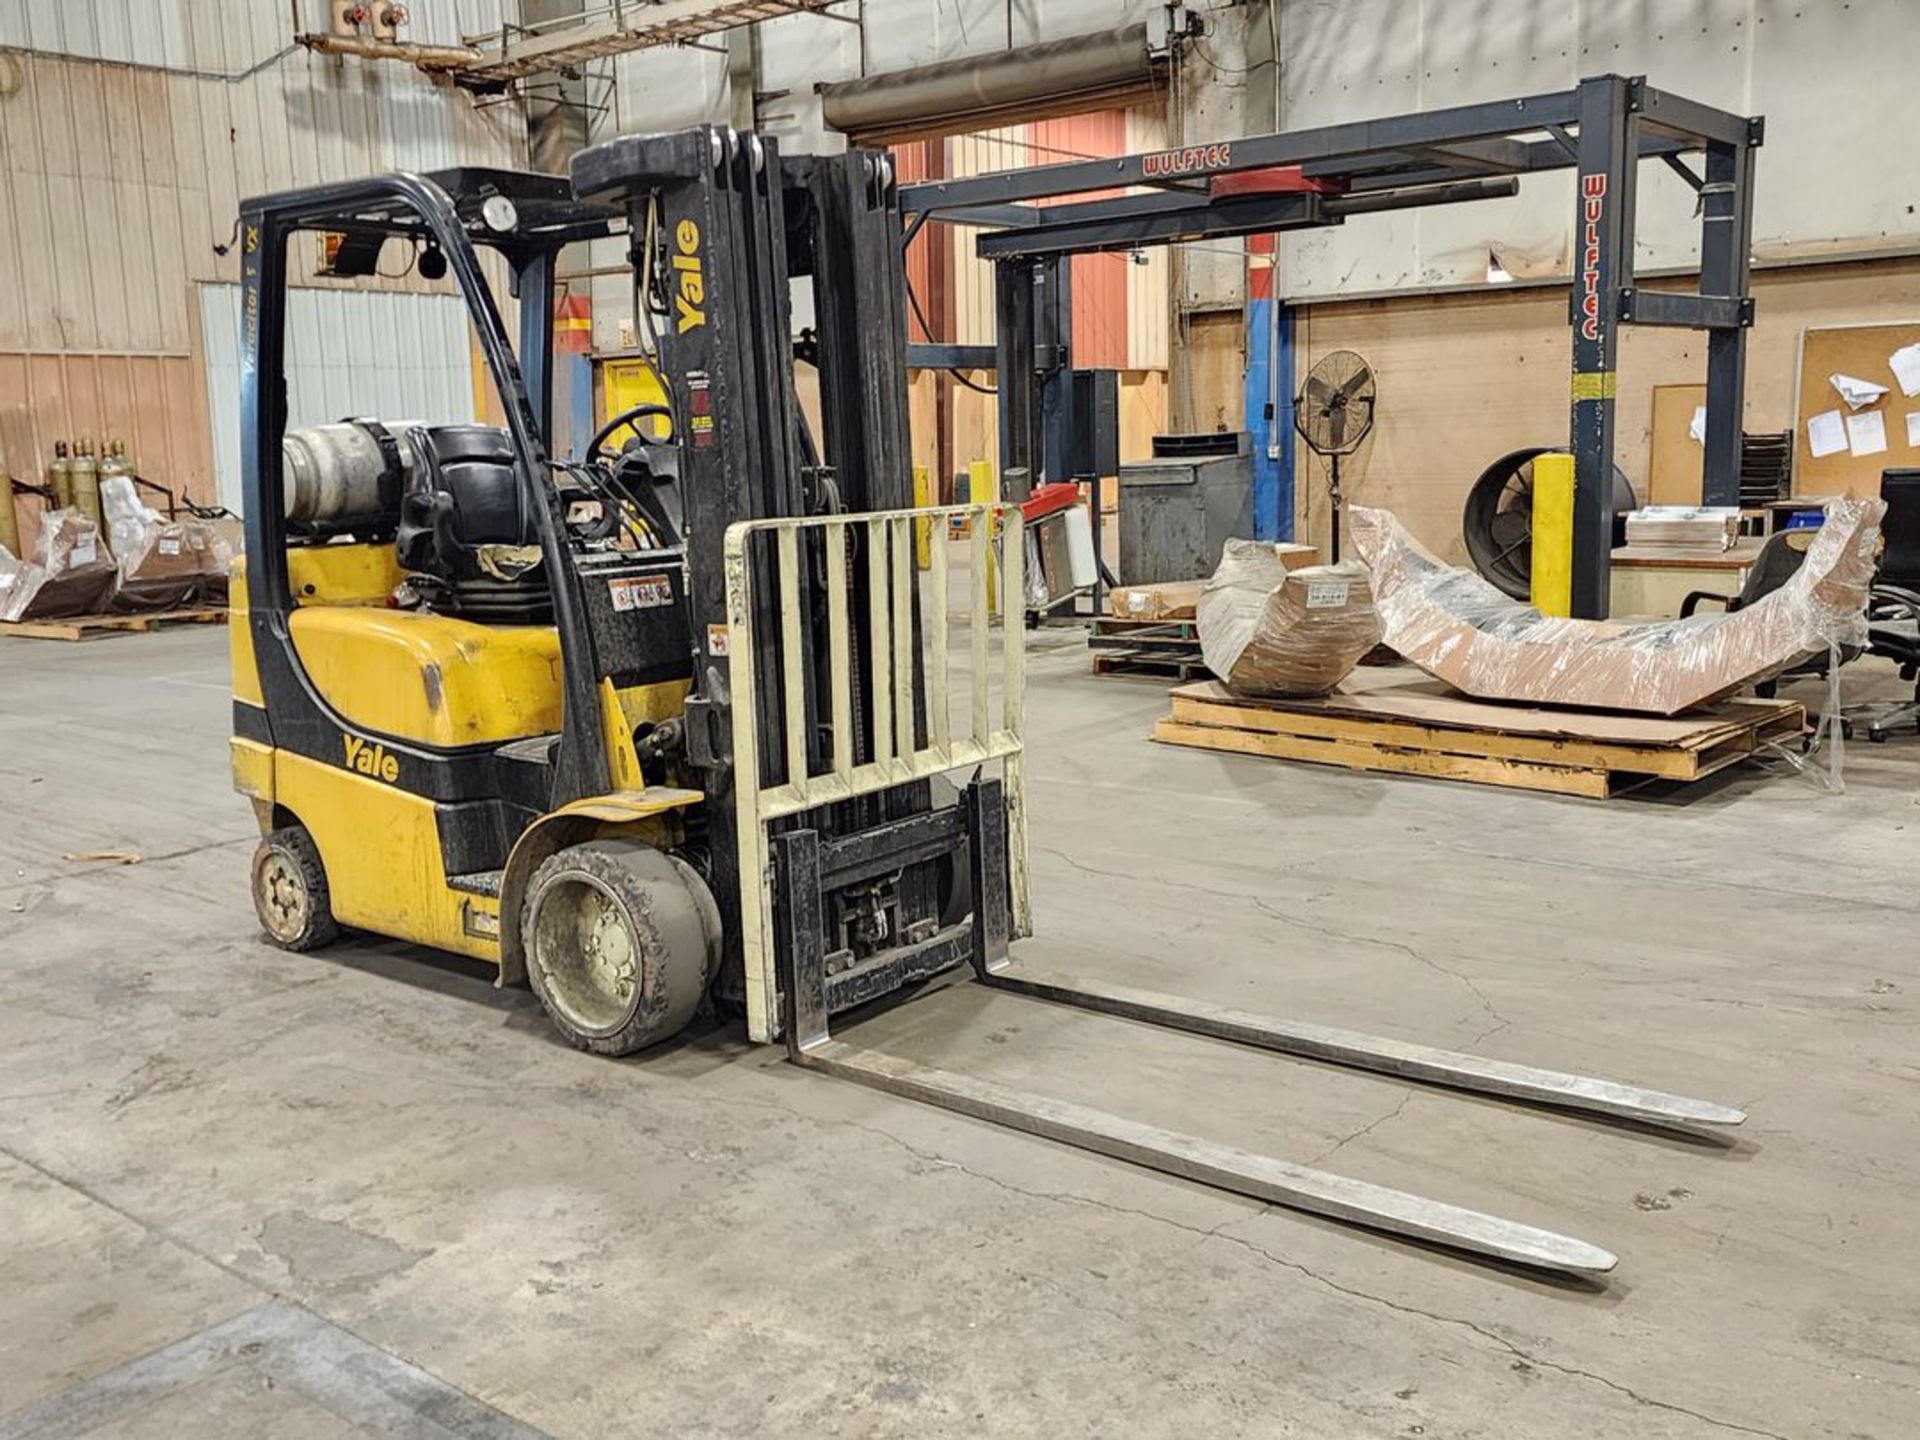 Yale GLC0VXNEAQO84 LP Forklift 4-Stage Mast, W/ 72" Forks, 240" Max Lift Ht., 4,577hrs, 4400lb Cap.; - Image 2 of 15